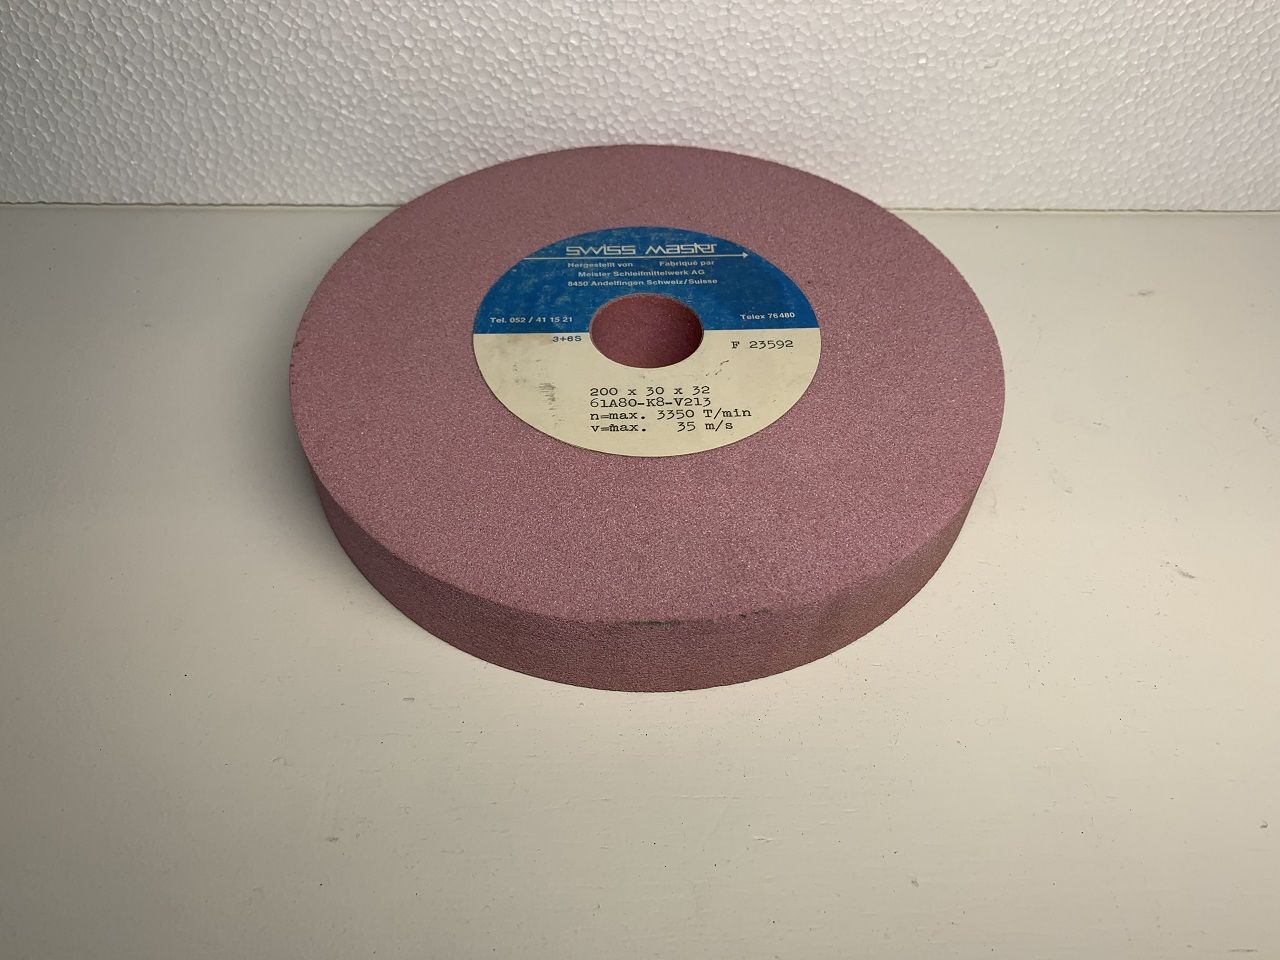 Spares & Accessories/SWISS MASTER Grinding Wheel Dia 200X30X32